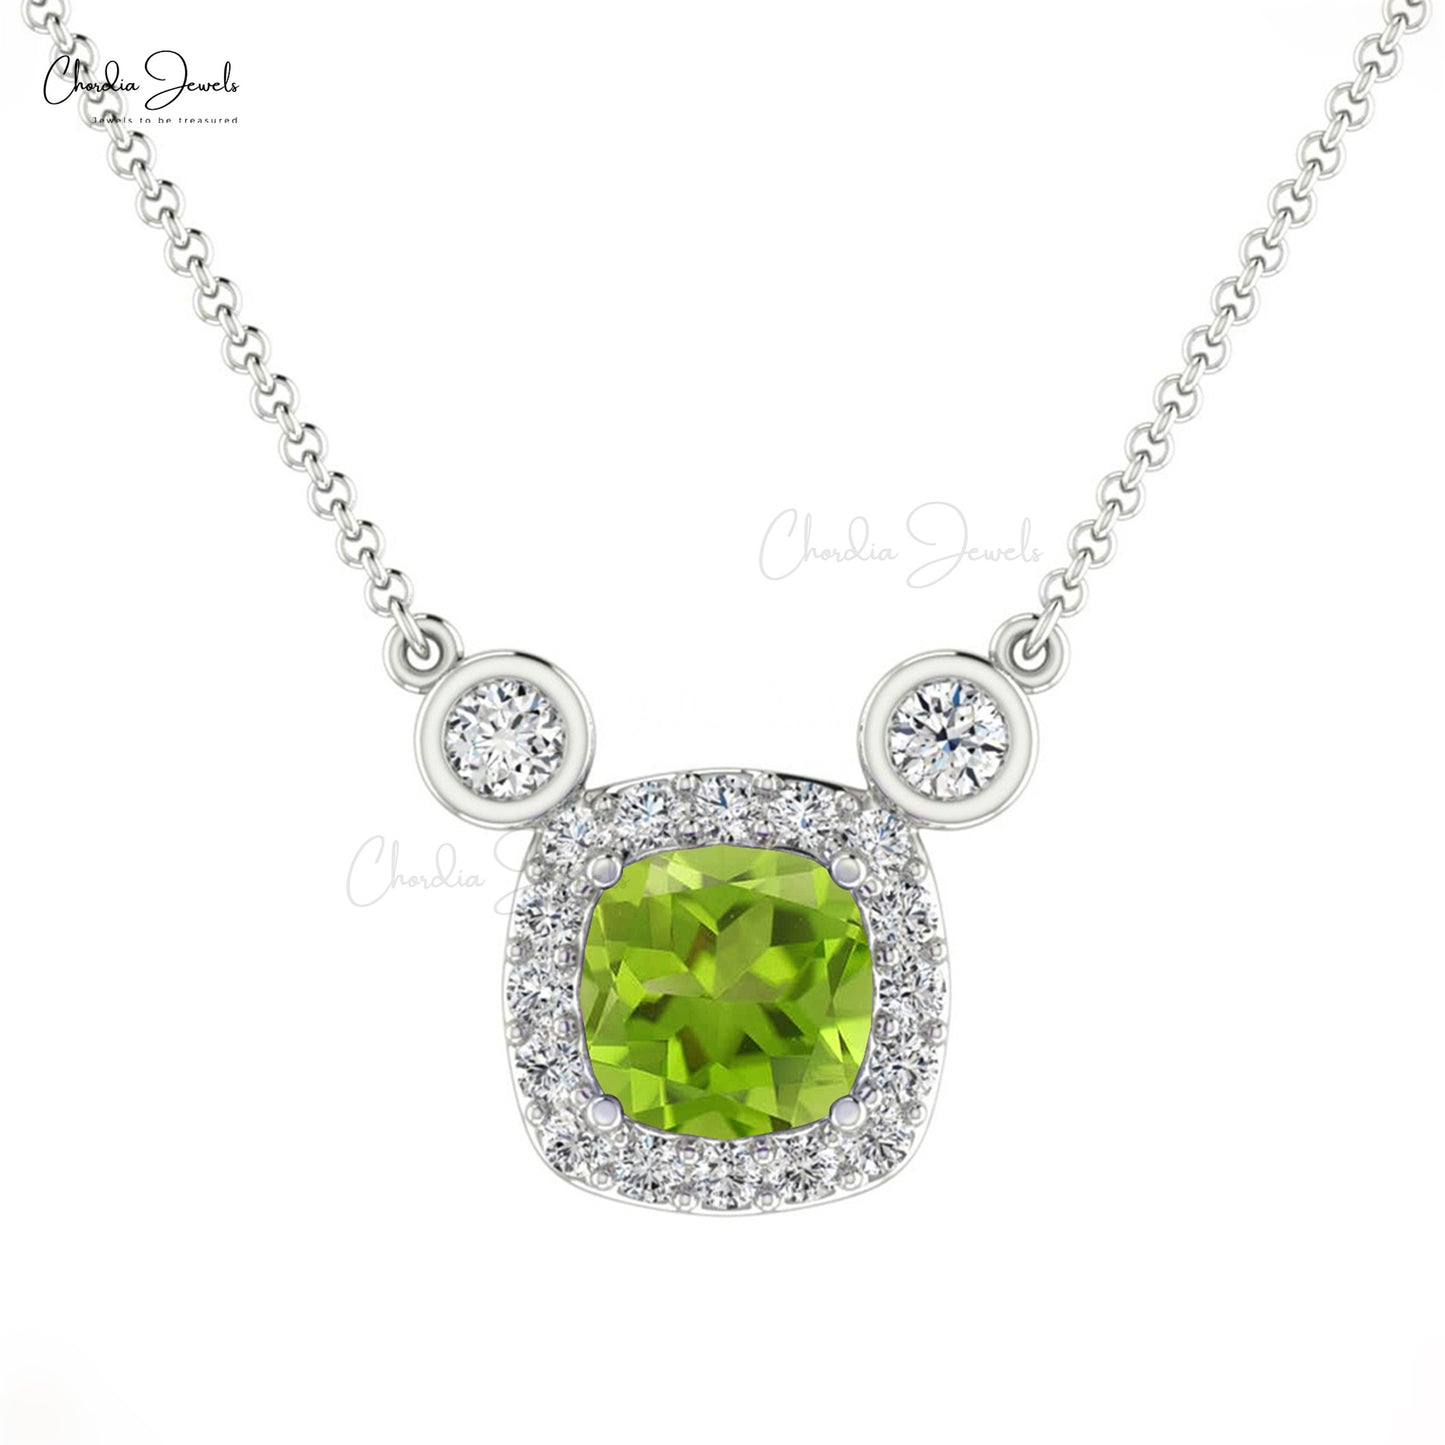 4mm Cushion Cut Gemstone Natural Peridot Handmade Necklace 14k Solid Gold Diamond Necklace For Her